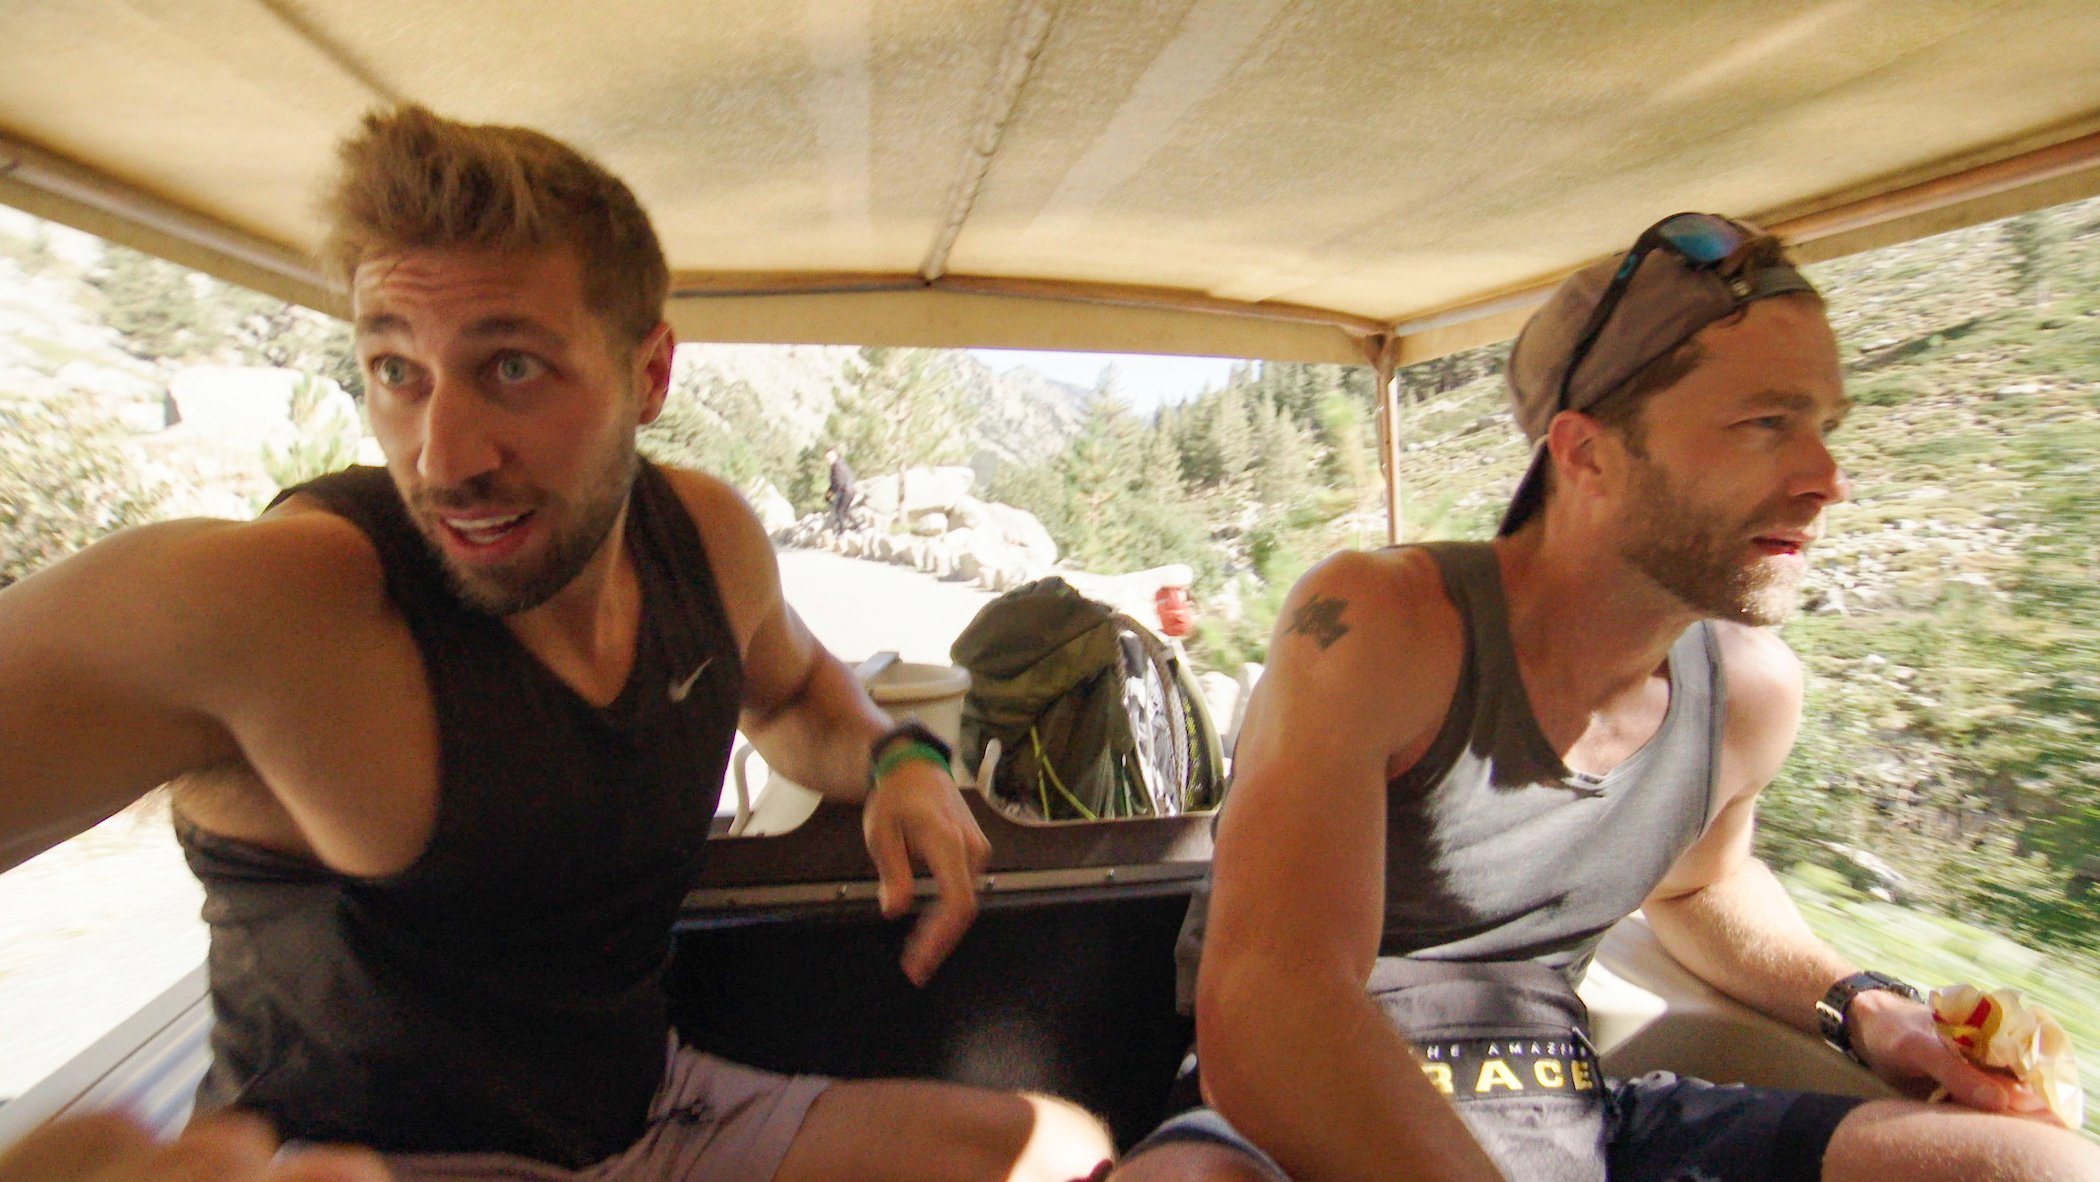 Ryan Ferguson and Dusty Harris riding in a vehicle looking stressed on 'The Amazing Race' Season 33 Episode 6